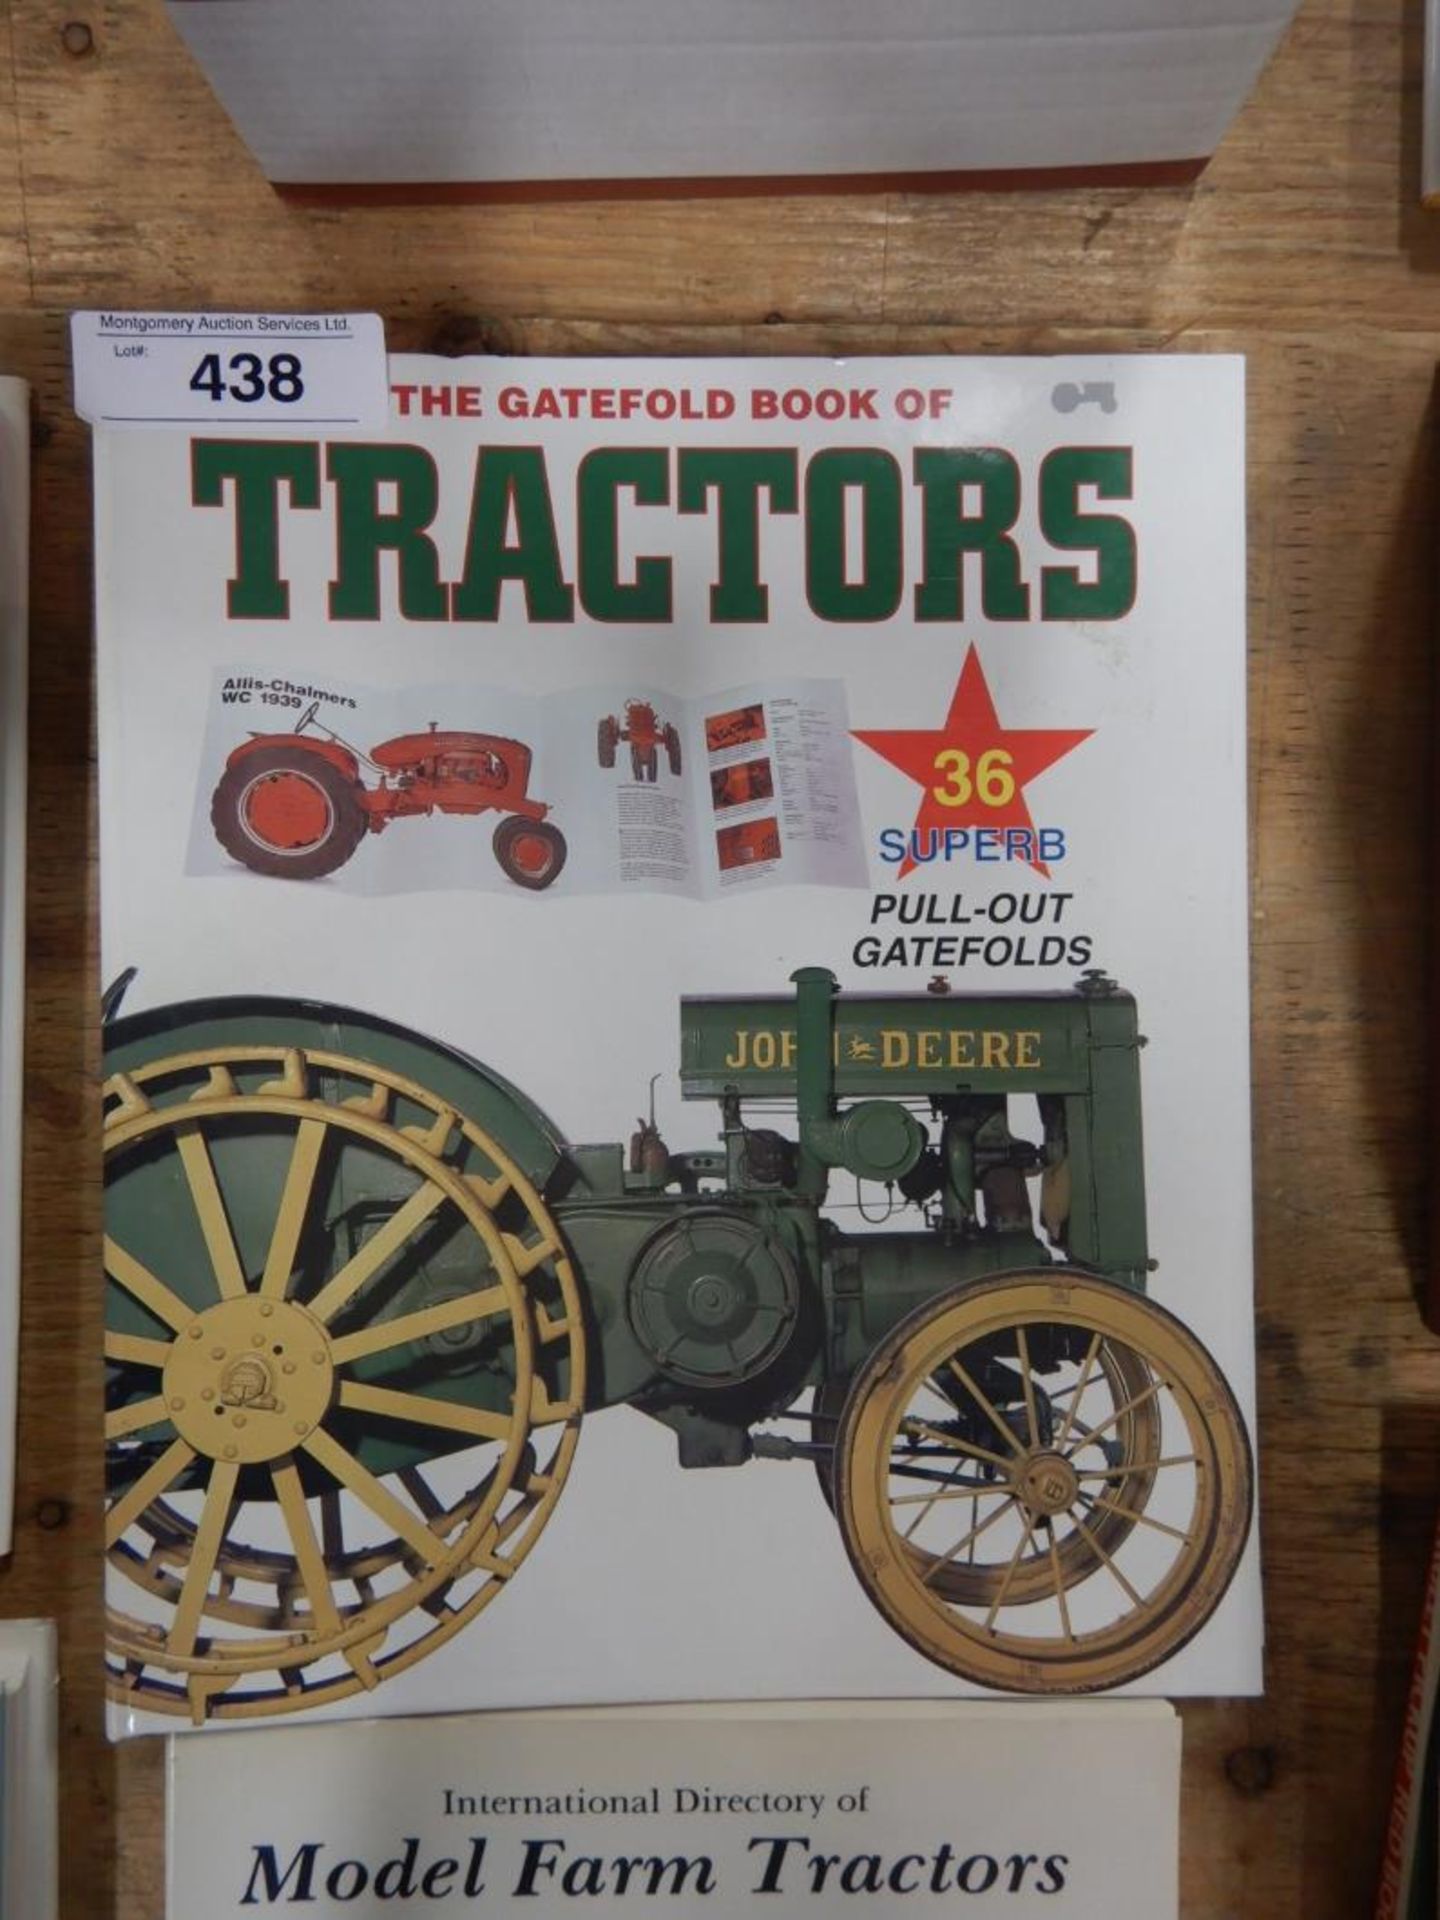 THE GATEFOLD BOOK OF TRACTORS & THE INTERNATIONAL DIRECTORY OF MODEL FARM TRACTORS